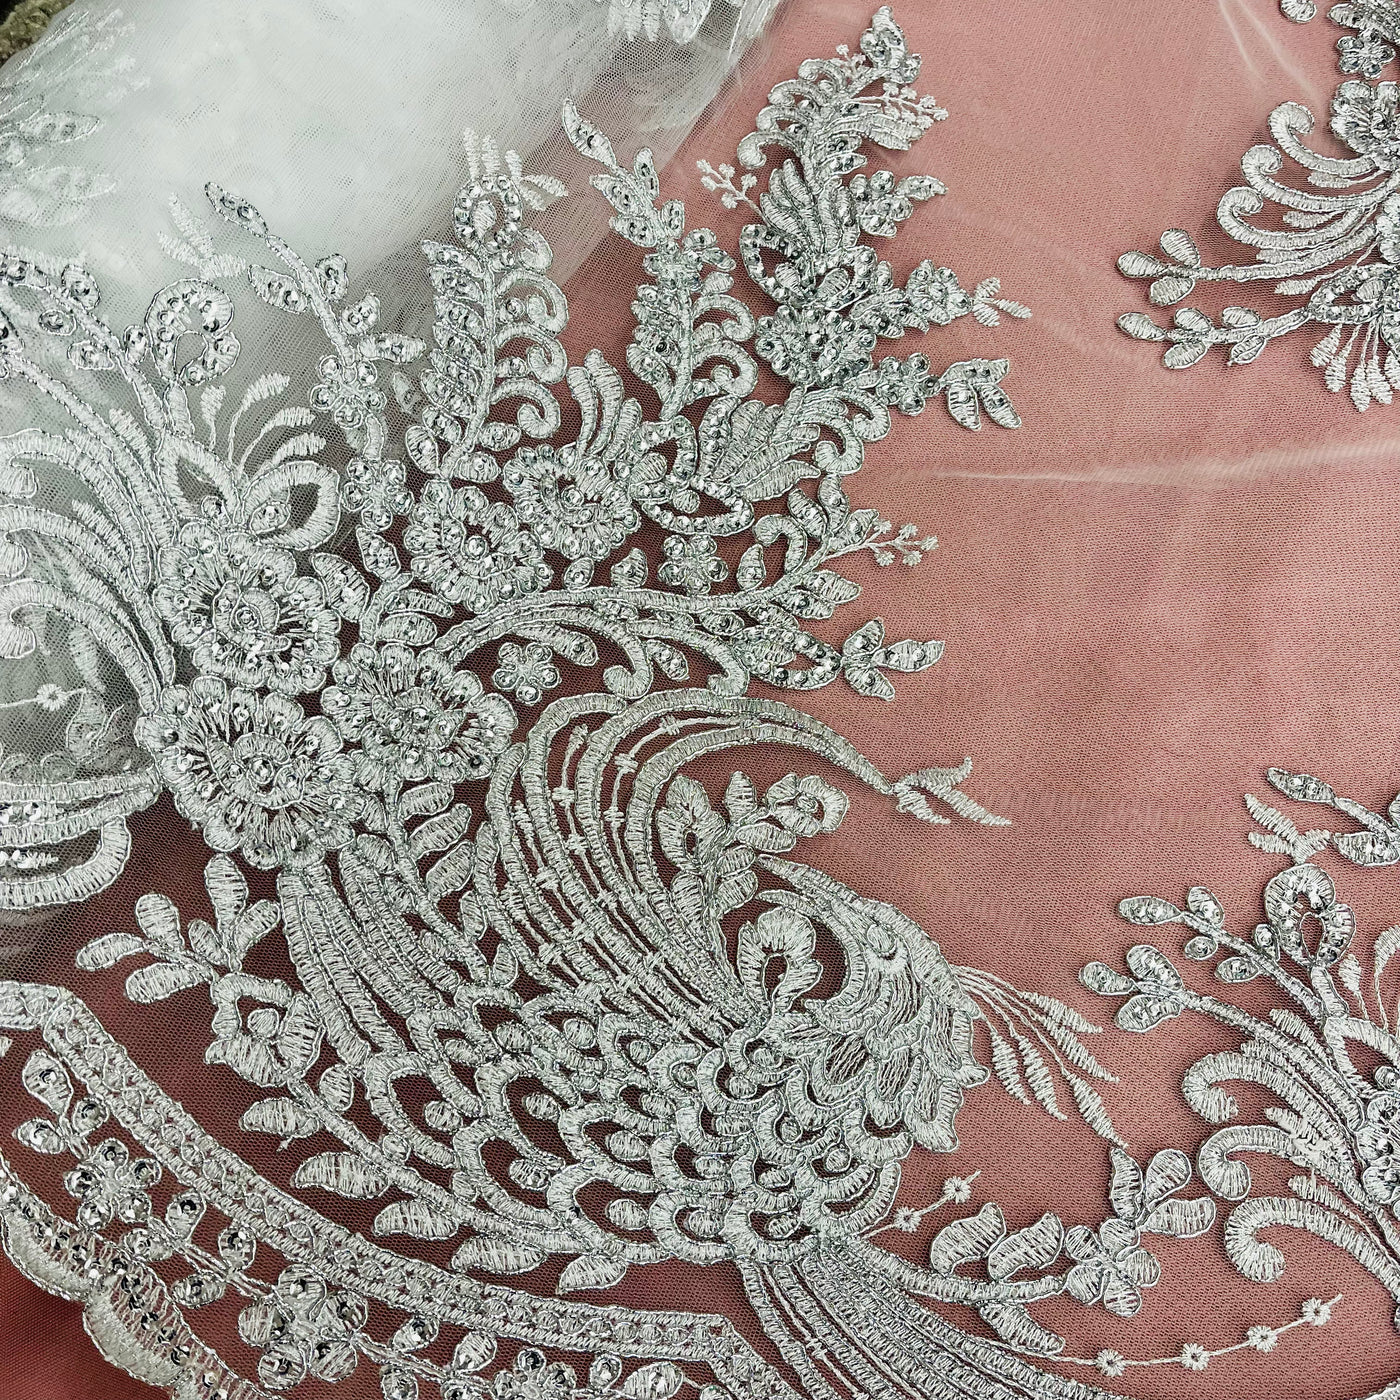 Beaded & Corded Bridal Lace Fabric Embroidered on 100% Polyester Net Mesh | Lace USA 